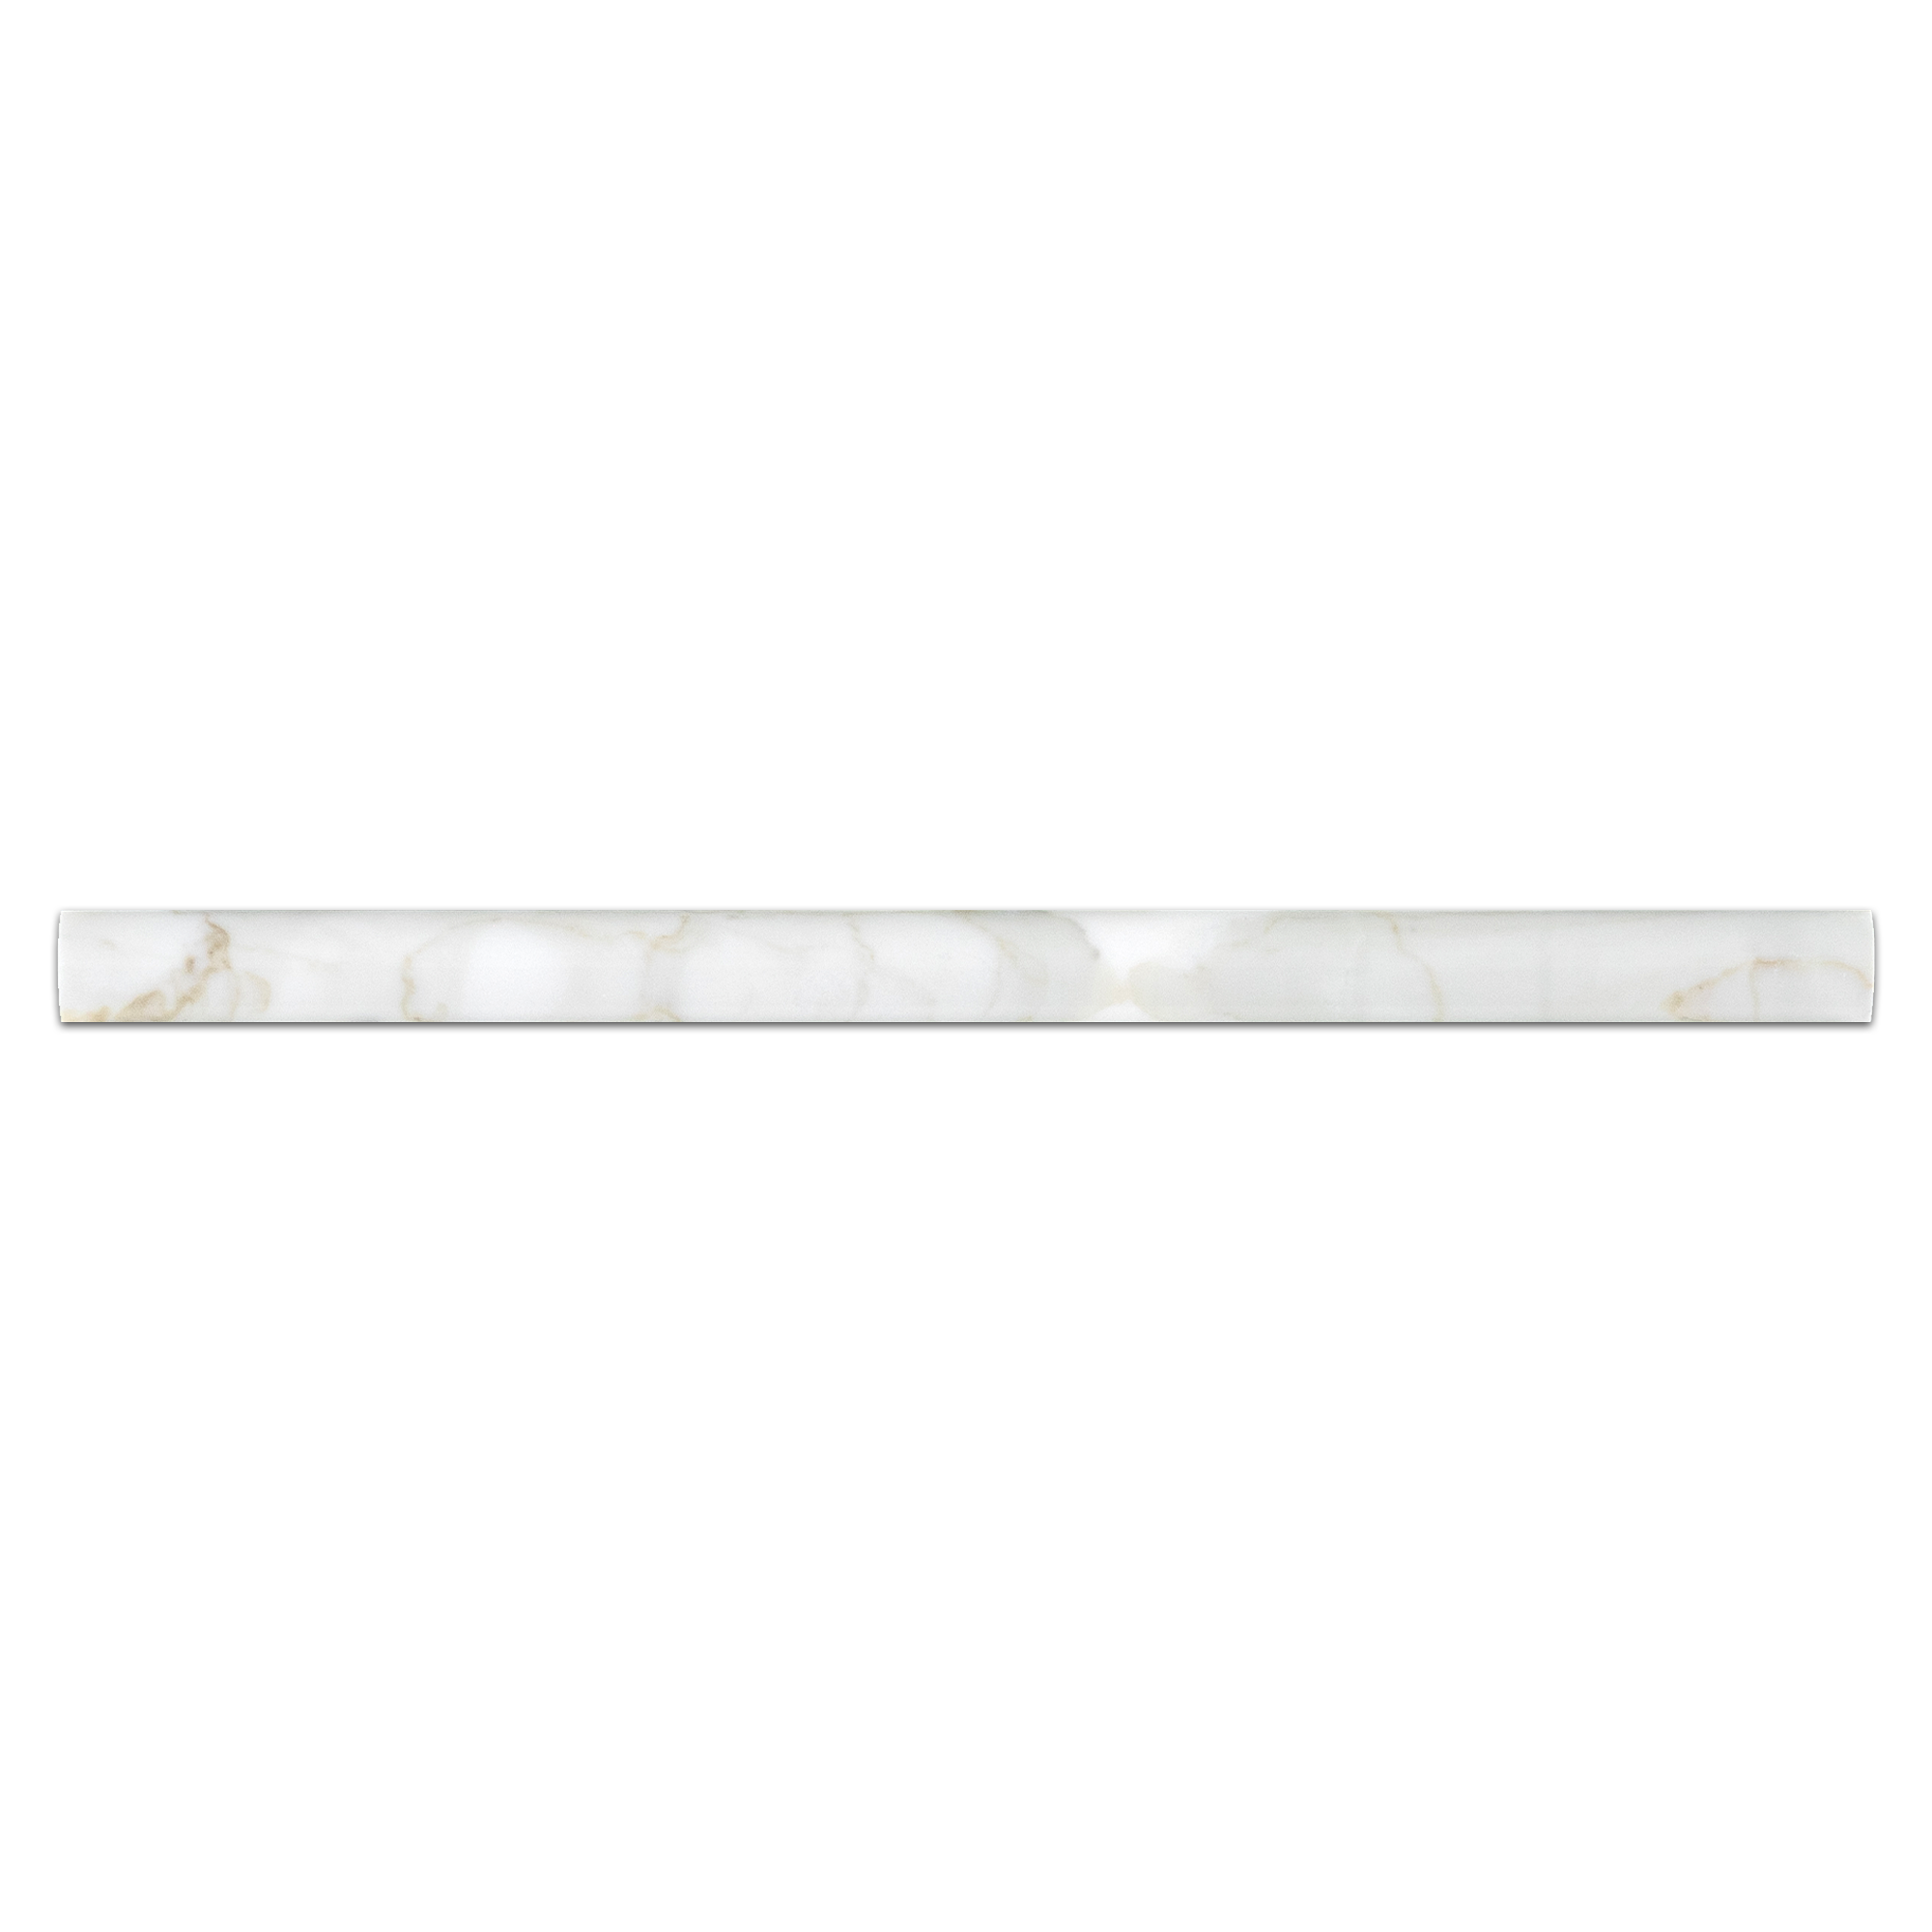 Elon Calacatta Gold Marble Pencil Molding 0.75x12 Honed Tile from Surface Group International.